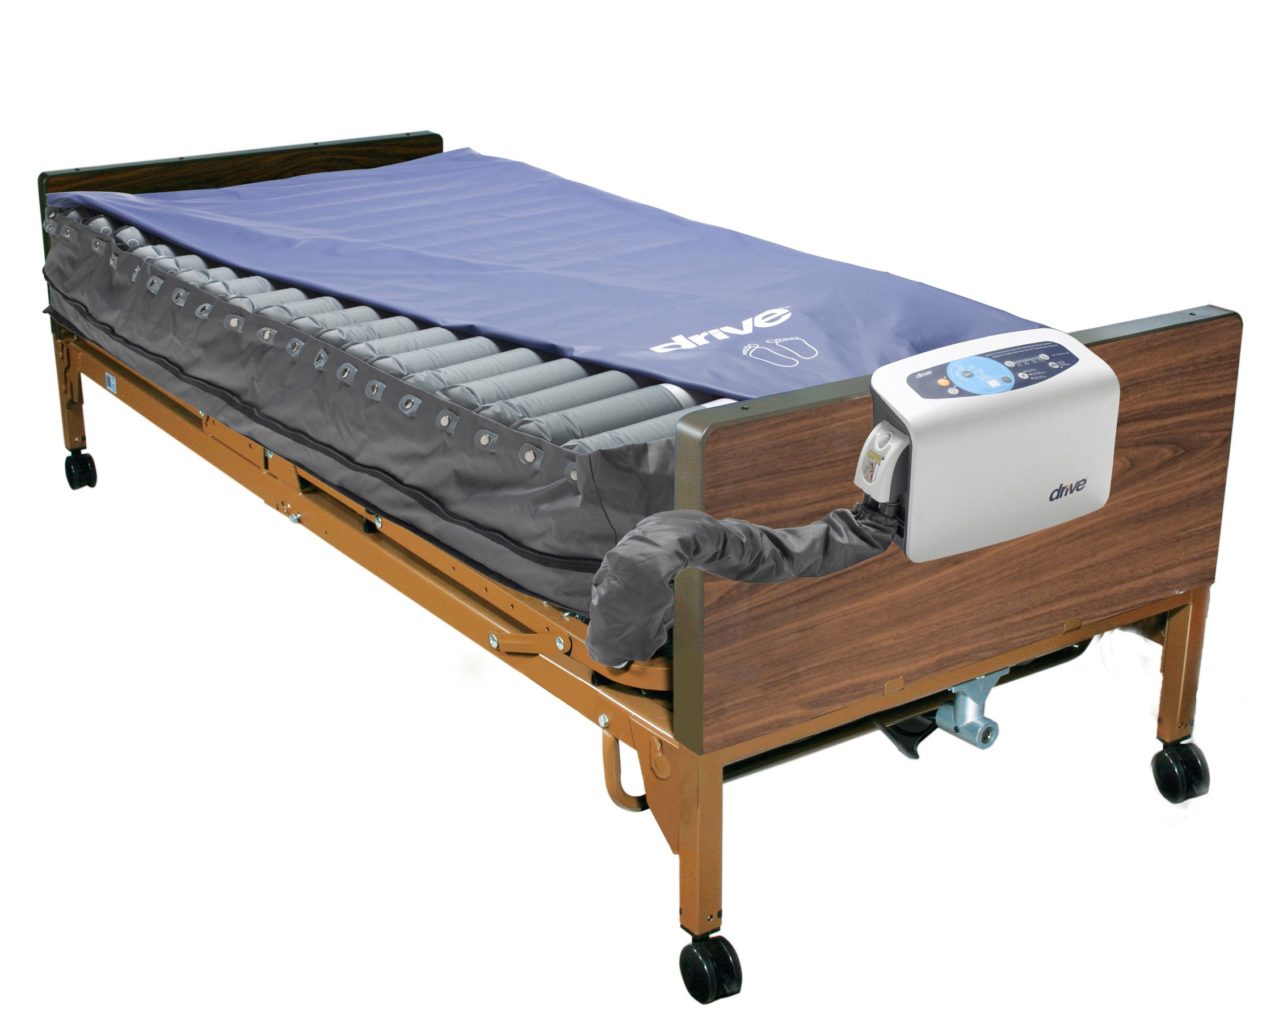 Harmony True Low Air Loss Tri-Therapy Mattress Replacement System is in stock and available at On The Mend Medical Supply & Equipment